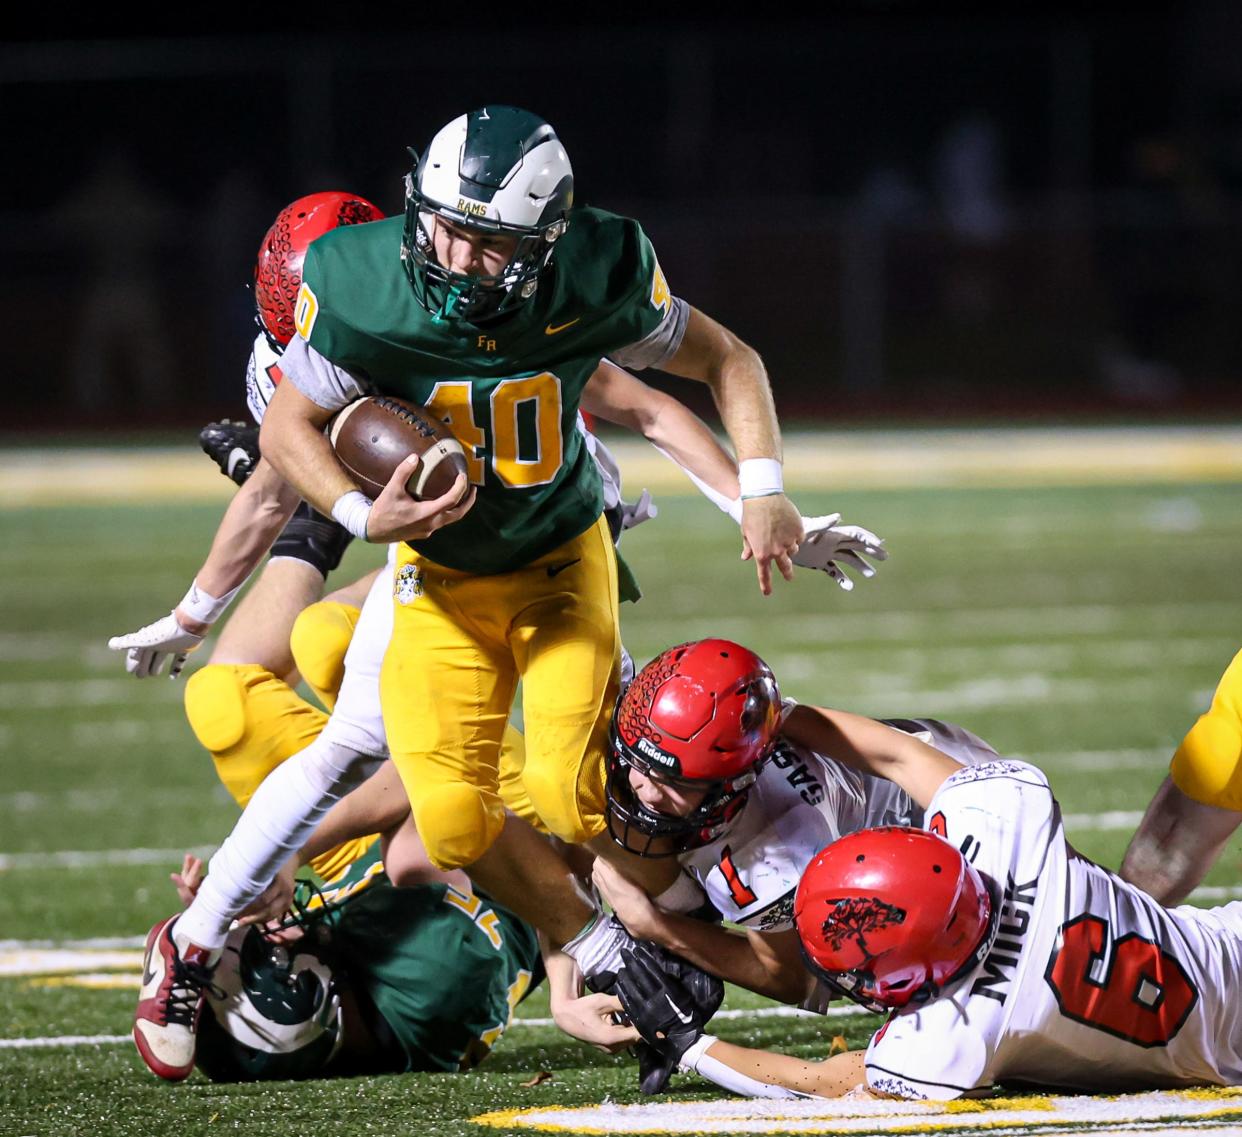 Brian Booms of Flat Rock runs past Milan defenders William Gaskell V, Gavin Mick (6) and CJ Fairbanks (13) during a 42-0 Flat Rock victory in the Division 5 state playoffs. Booms has been named Monroe County Region Offensive Player of the Year.